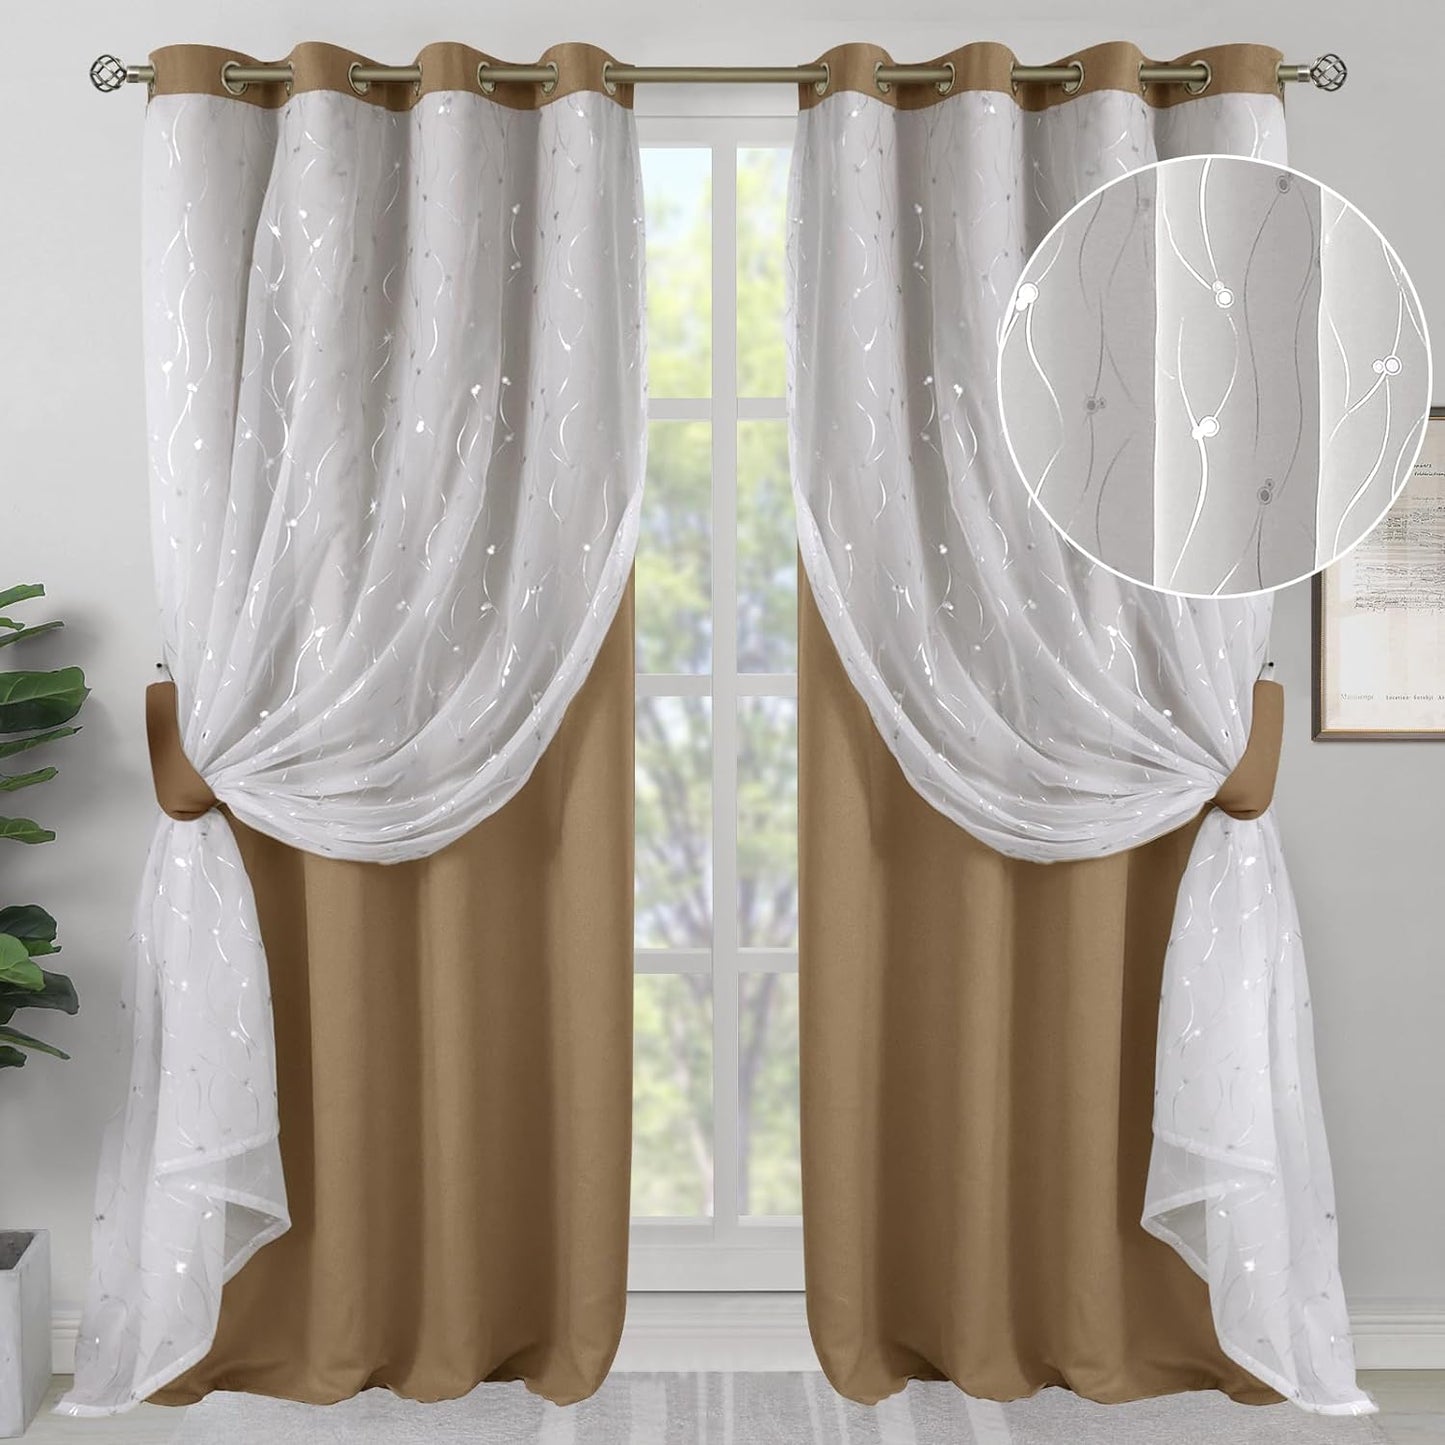 Bgment Grey Blackout Curtains with Sheer Overlay 84 Inches Long，Double Layer Silver Printed Kids Curtains Grommet Thermal Insulated Window Drapes for Living Room, 2 Panel, 52 X 84, Dark Grey  BGment Taupe 52W X 95L 